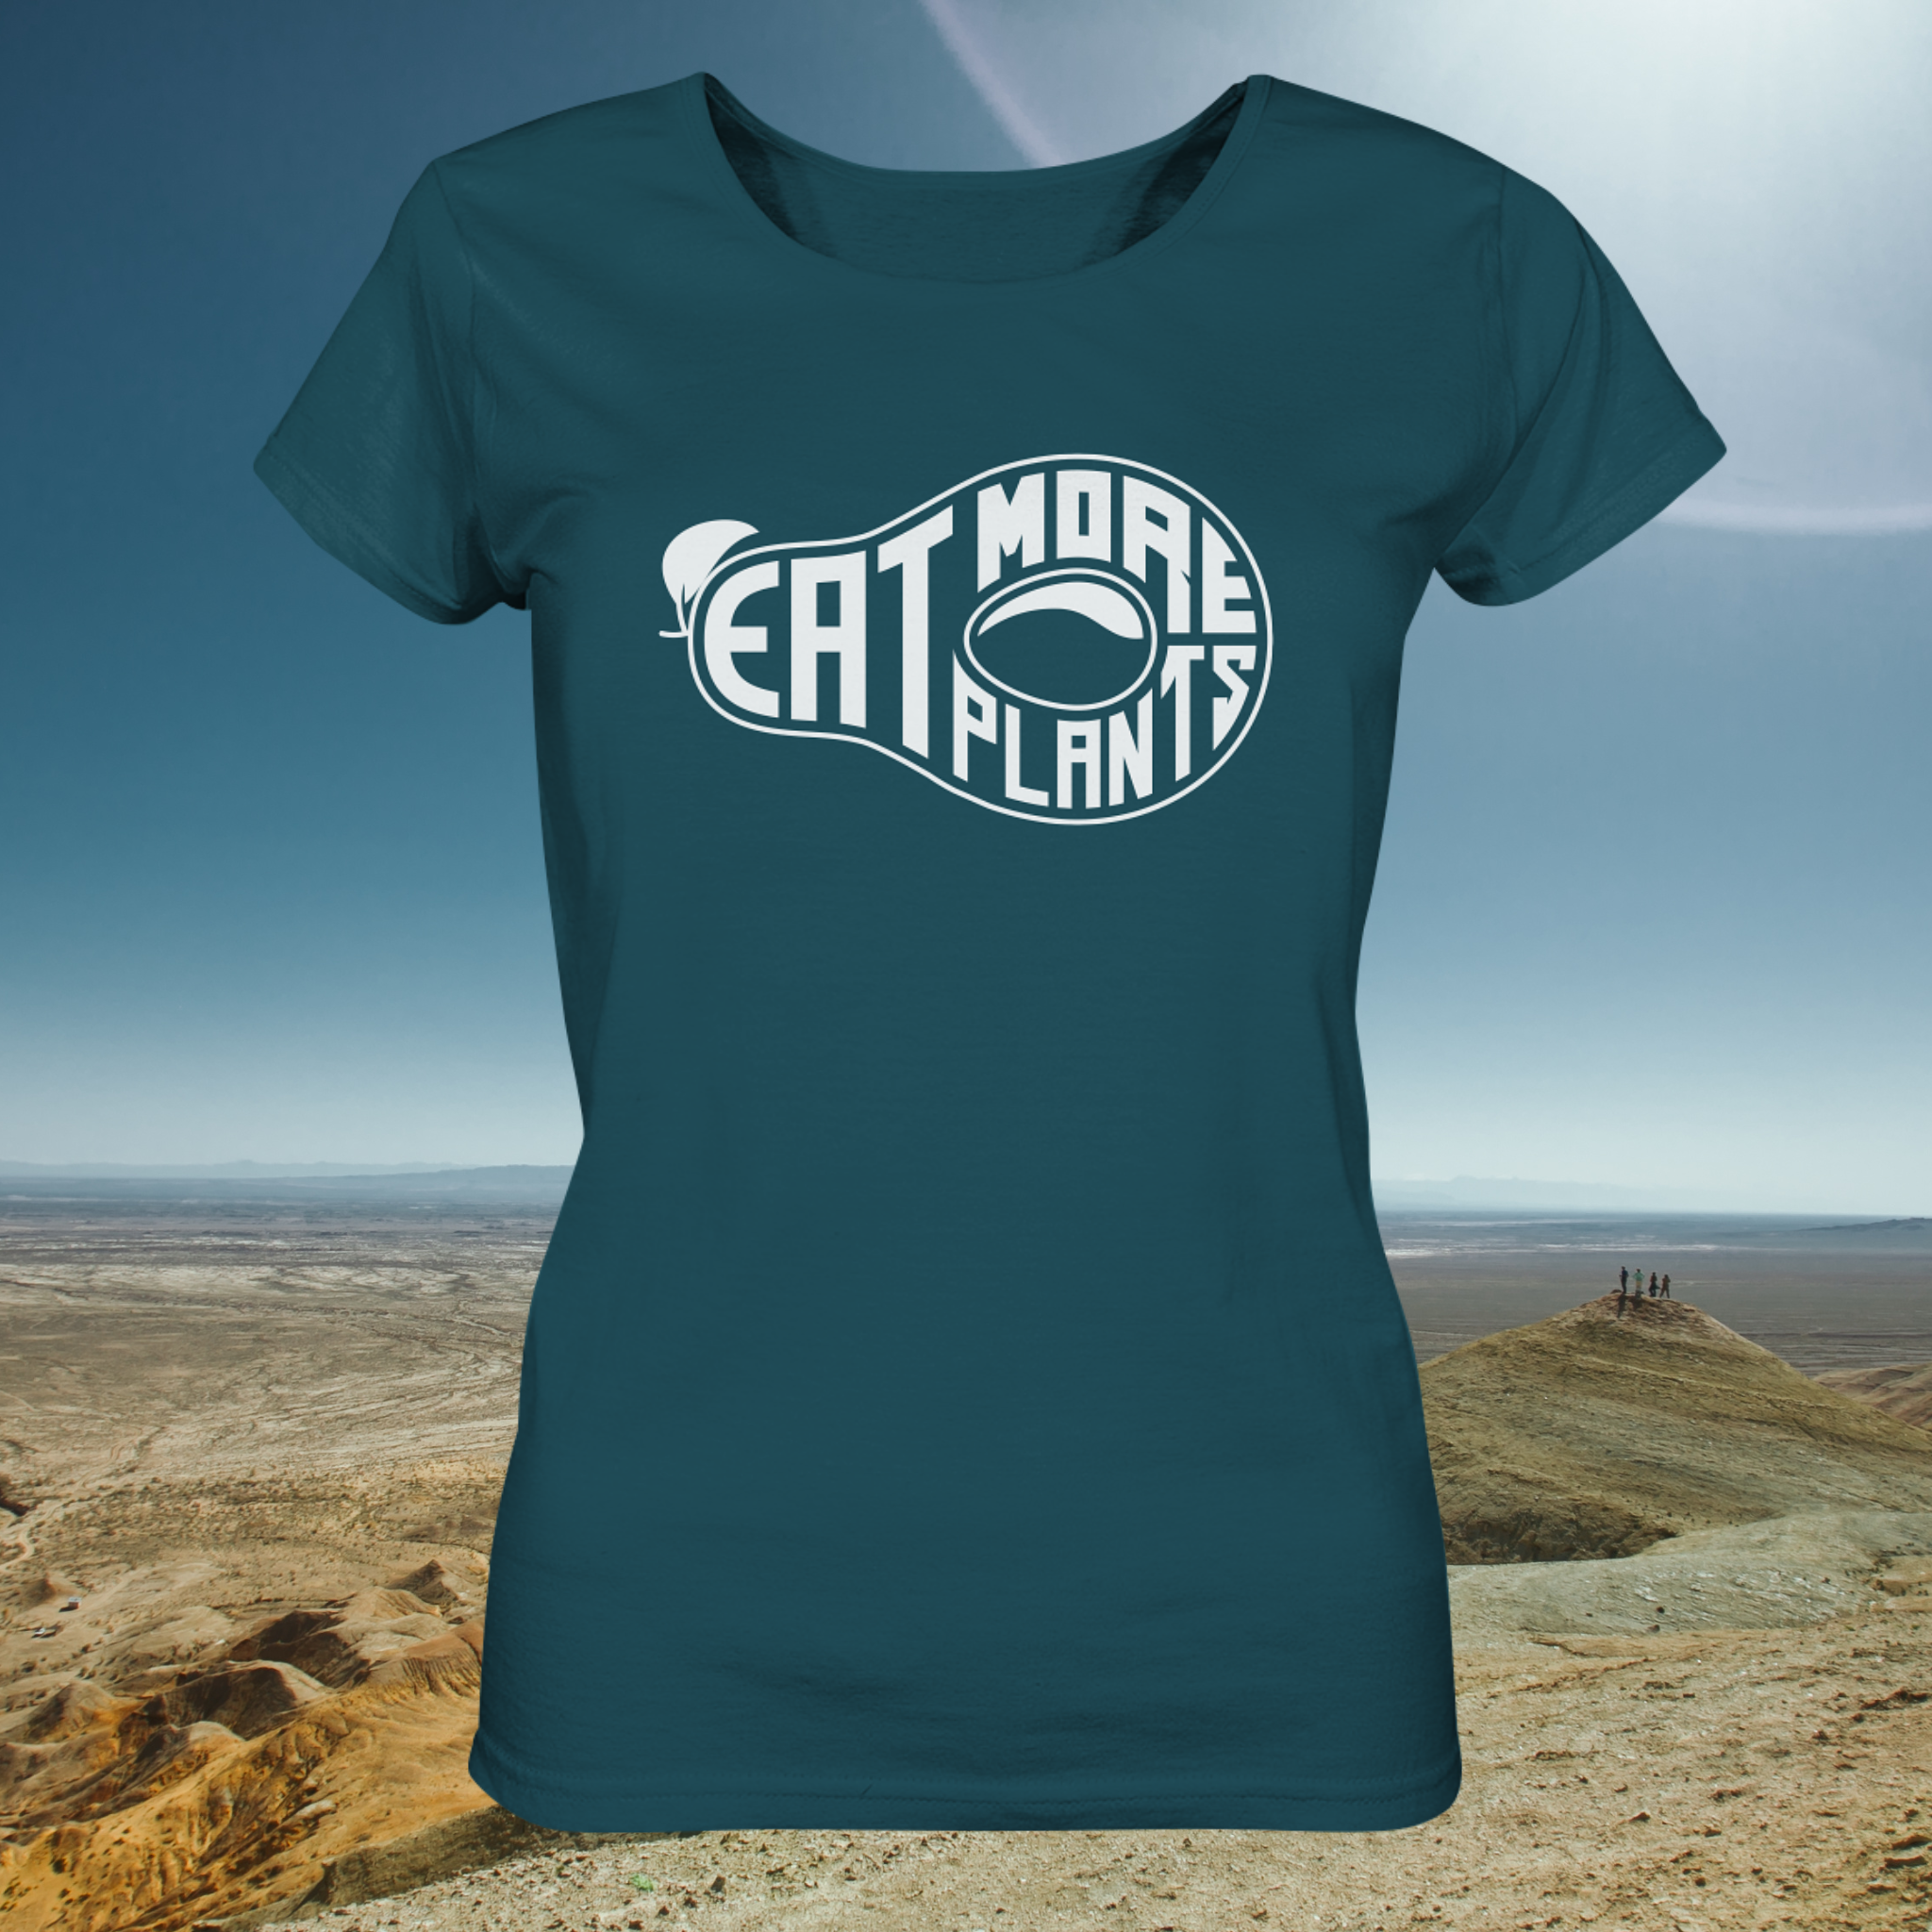 Organic ladies fitted scoop neck t-shirt in deep teal saying Eat More Plants on a sunny desert background